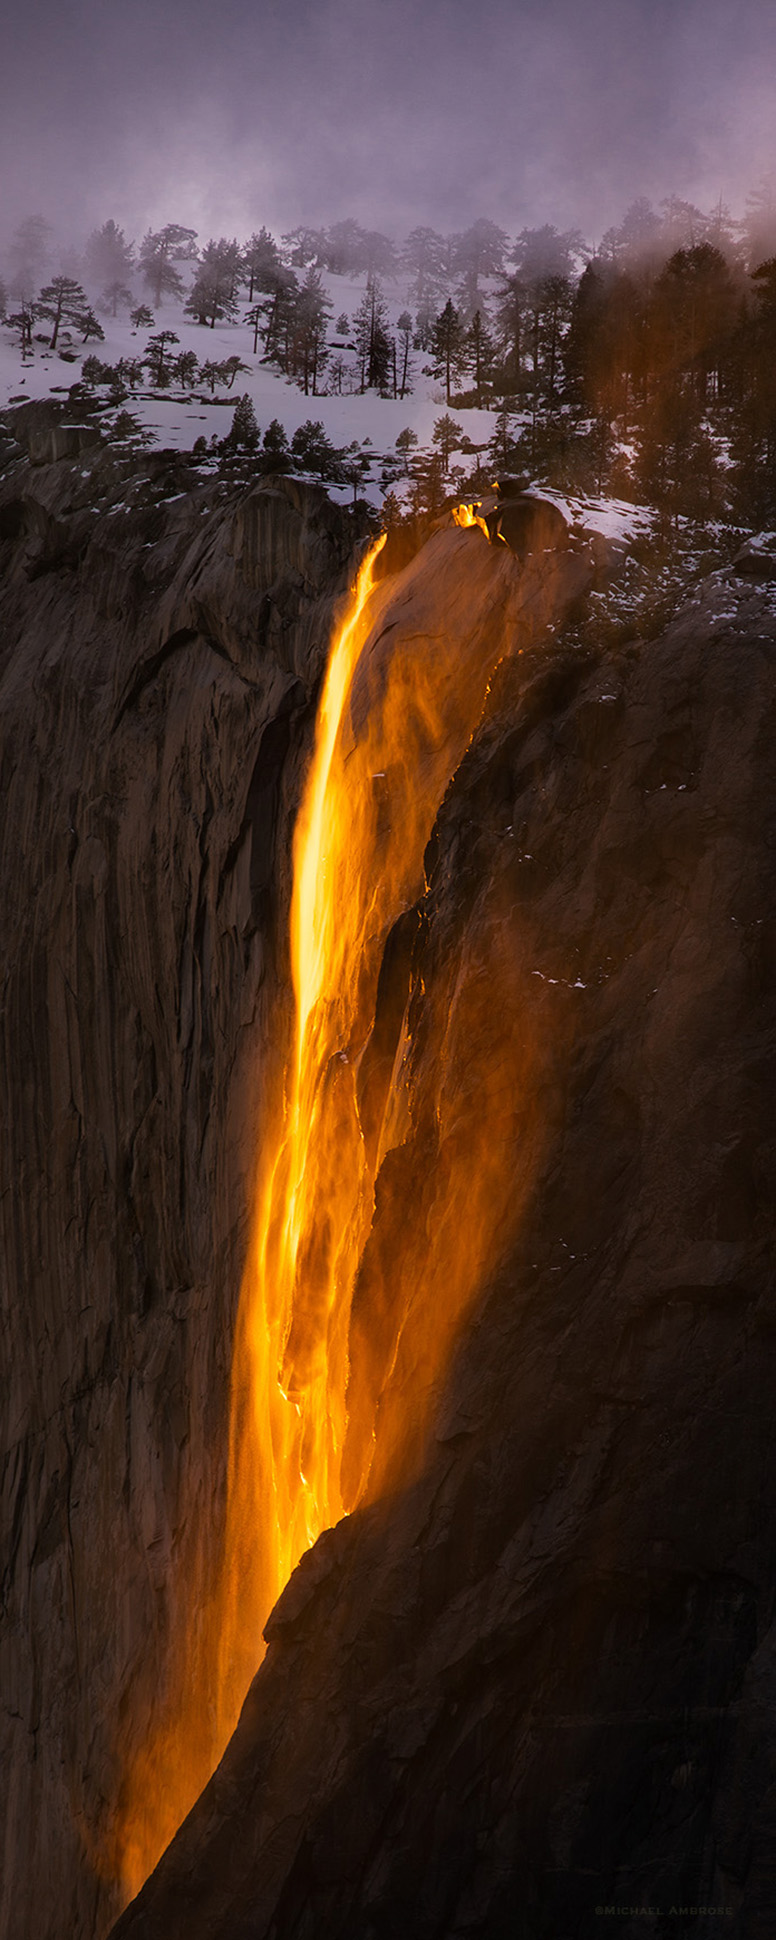 Every year I look forward to photographing the phenomenon of last light on Horsetail Fall. There is always an element of luck...